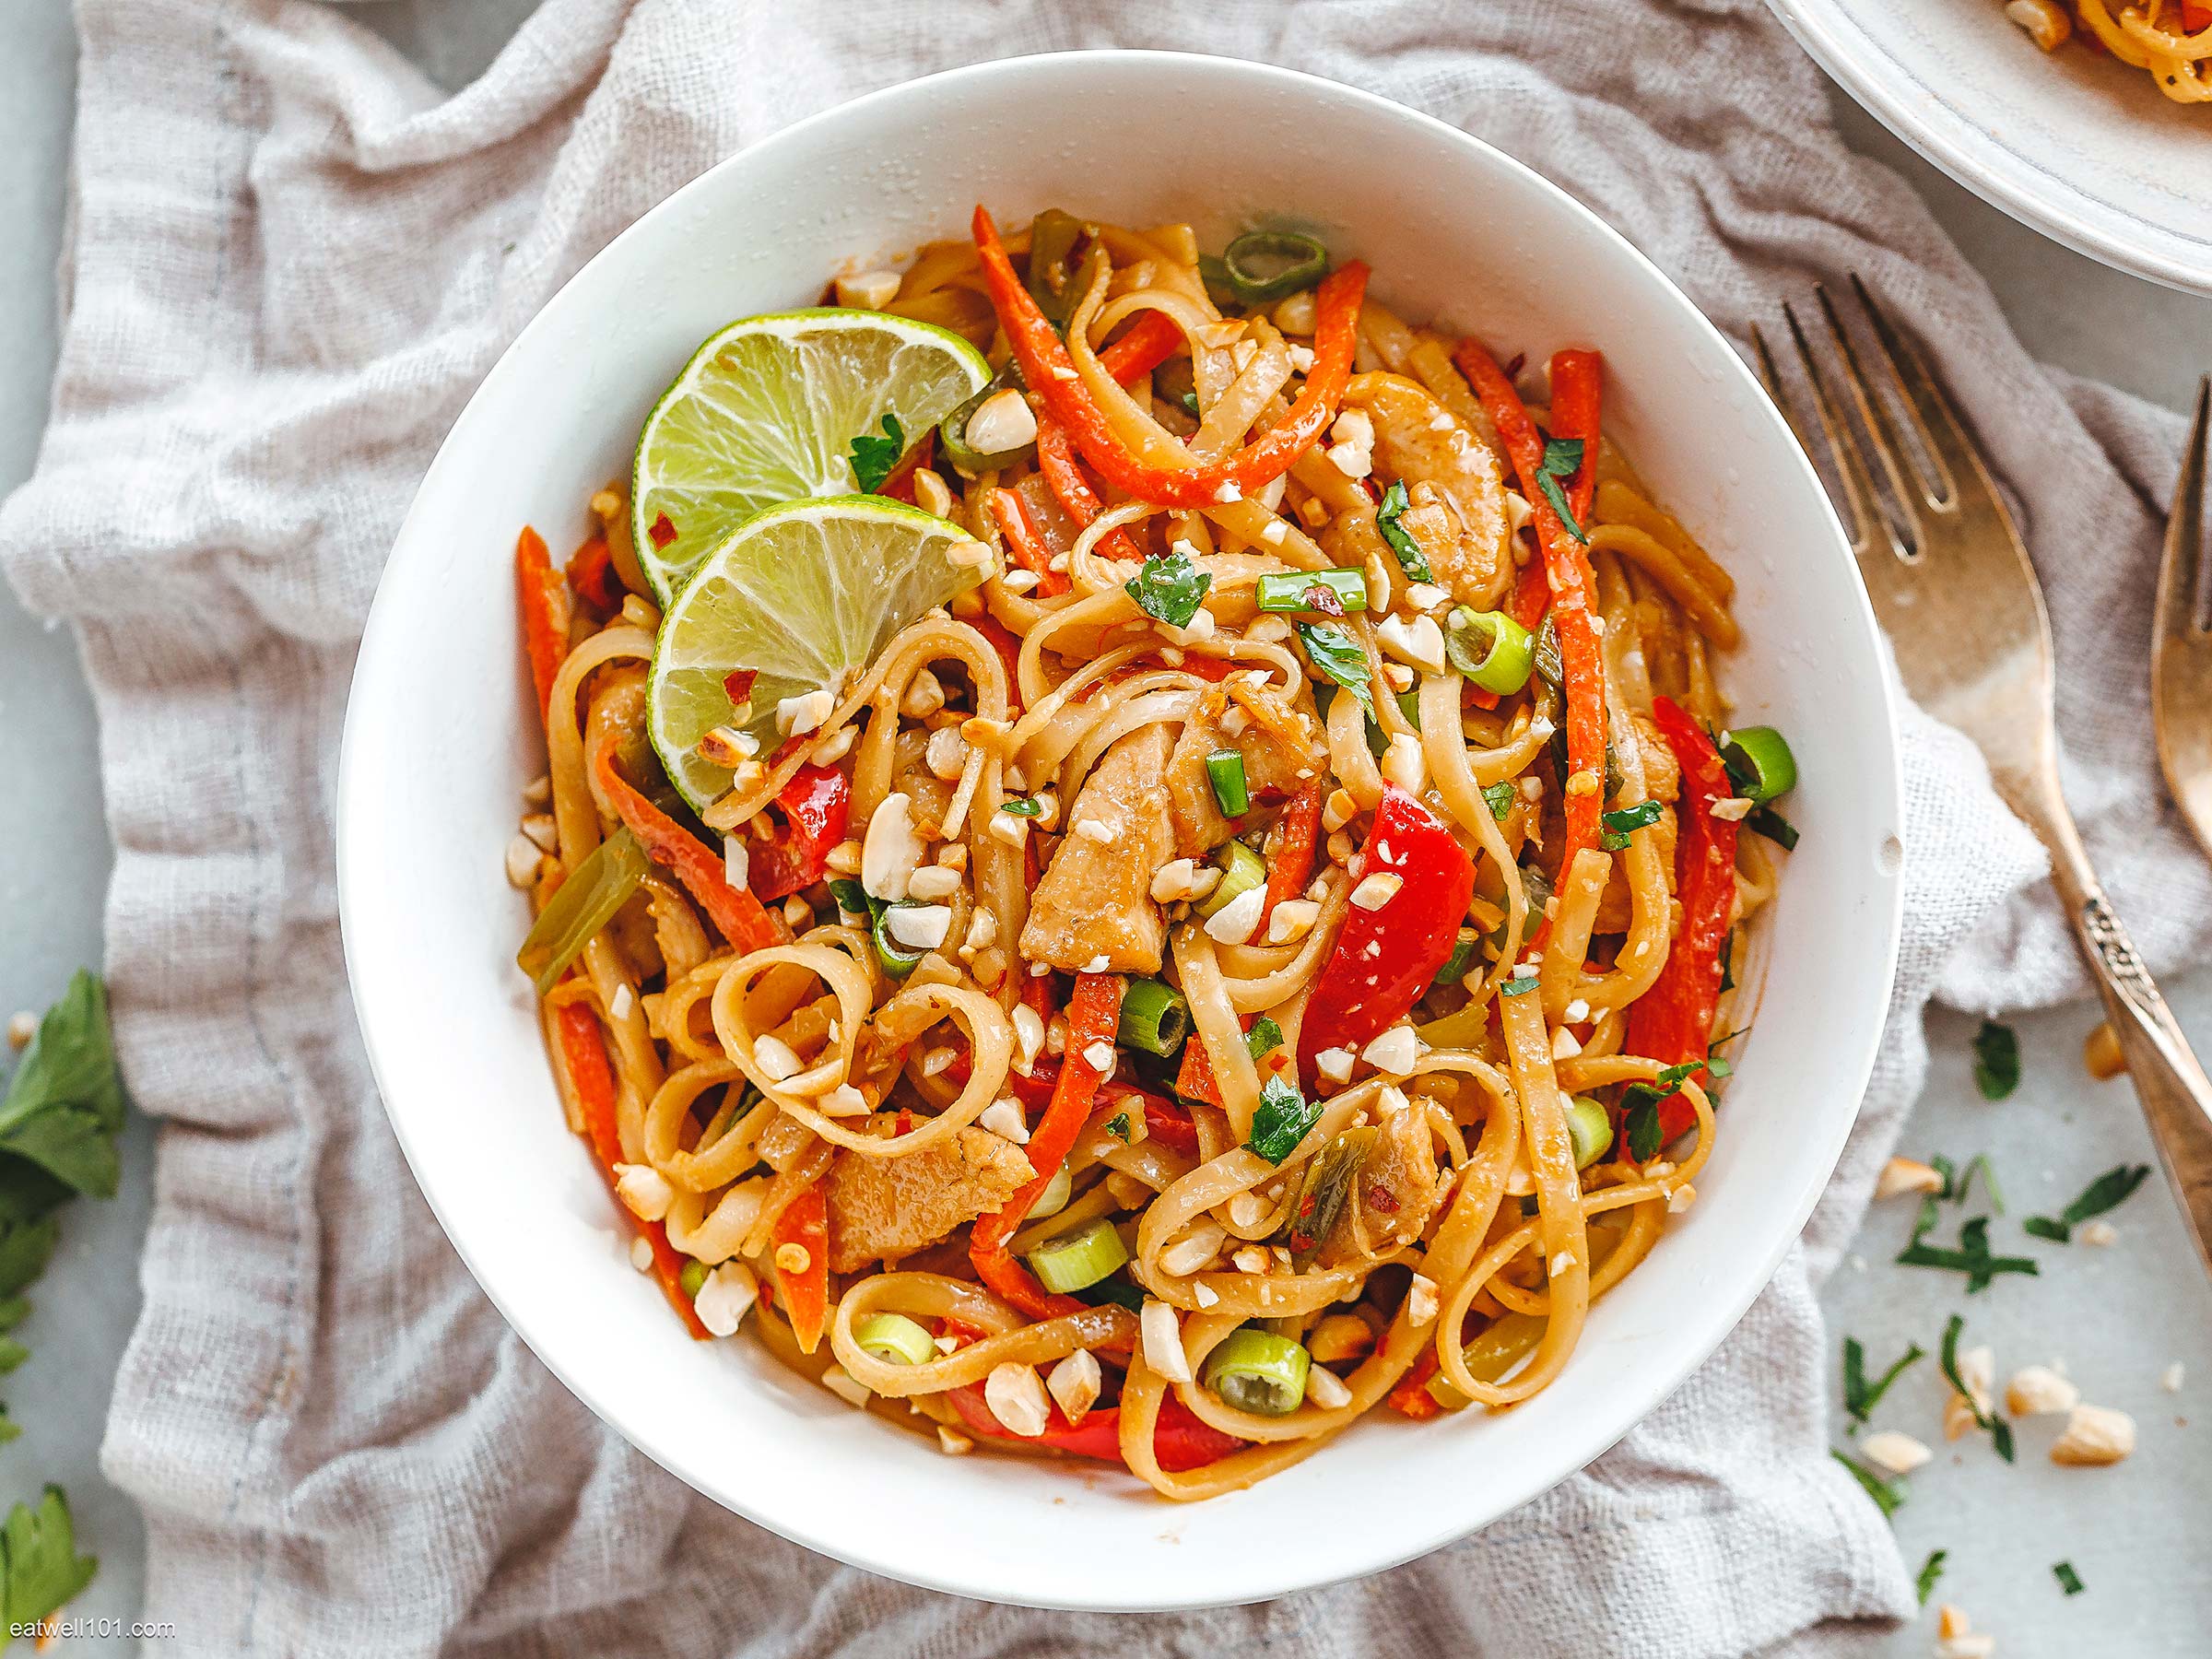 Instant Pot Chicken Pad Thai - The Recipe Well